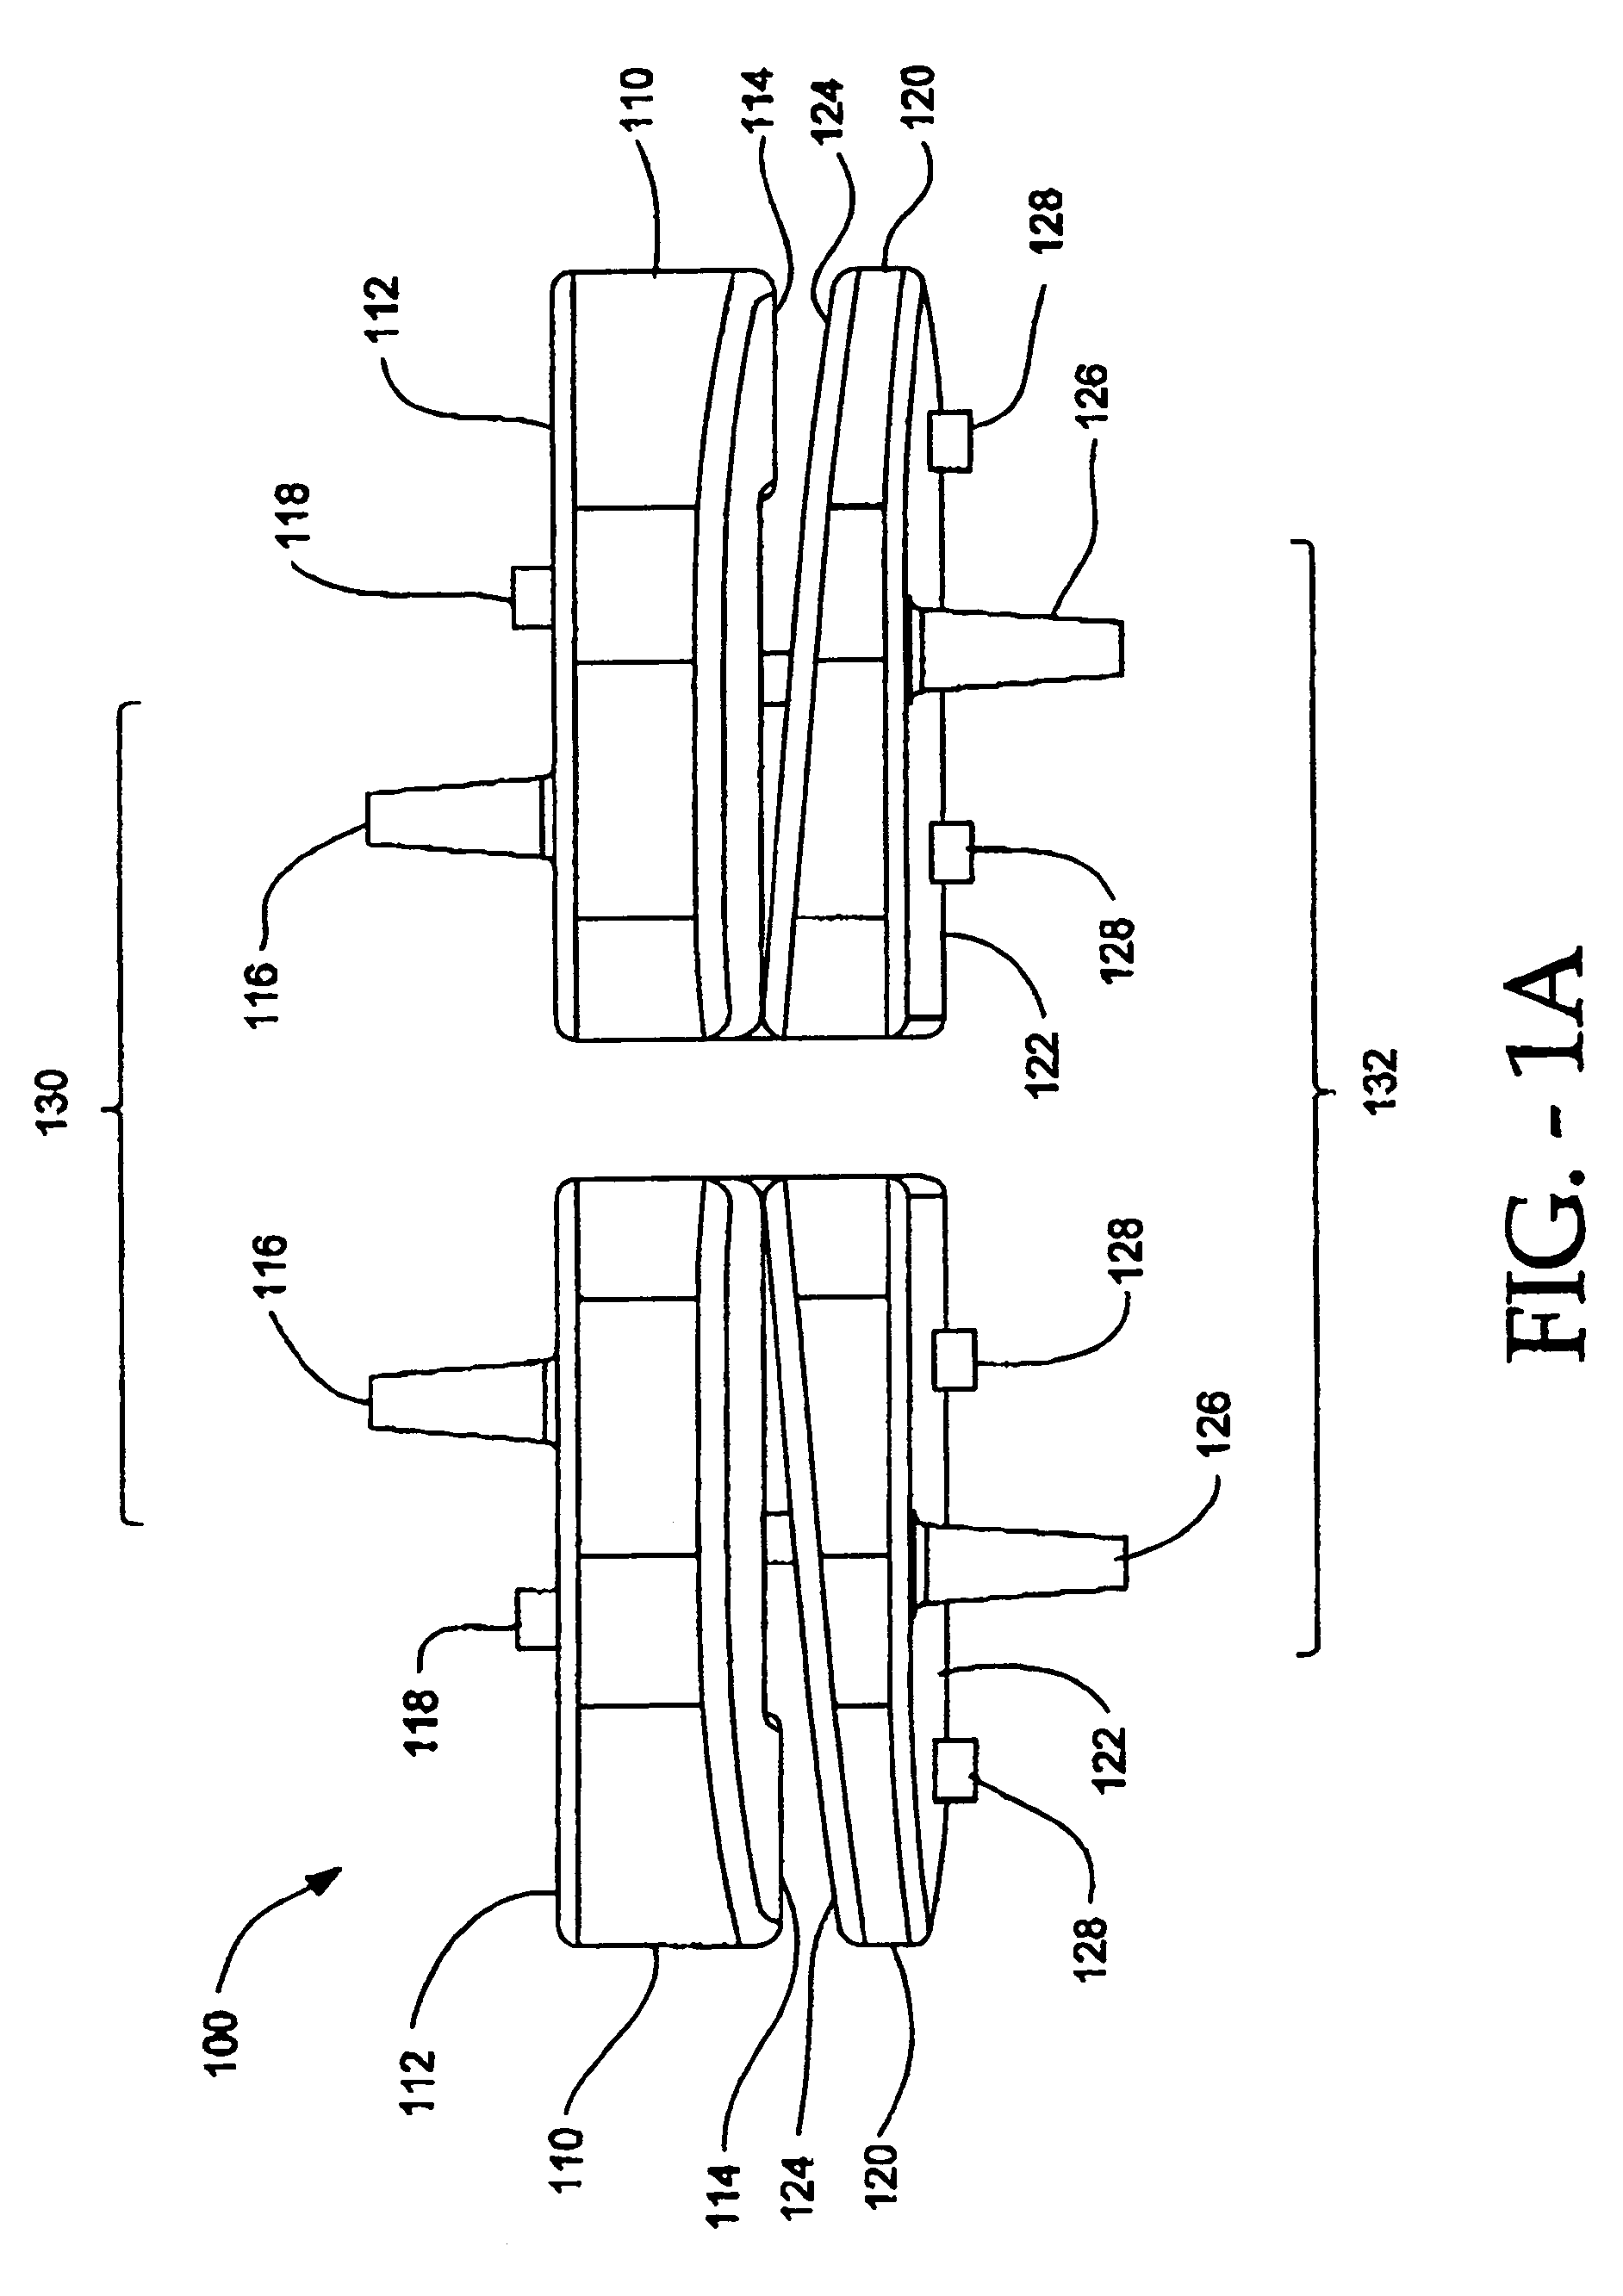 Artificial vertebral disk replacement implant with translating pivot point